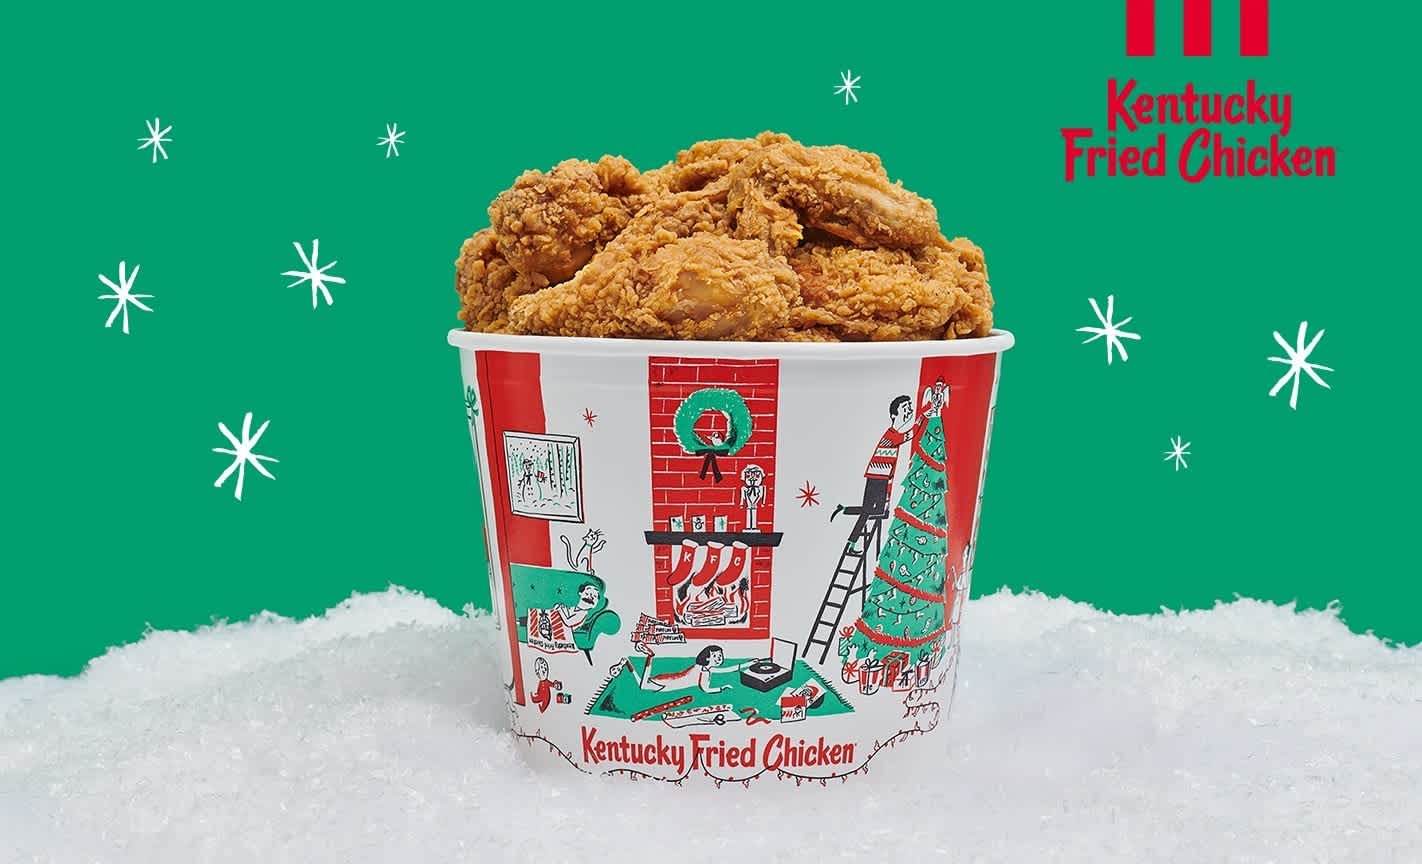 Kfc Kfc Gets In The Holiday Spirit With Limited Edition Holiday Buckets And Fried Chicken Inspired Gift Giveaway